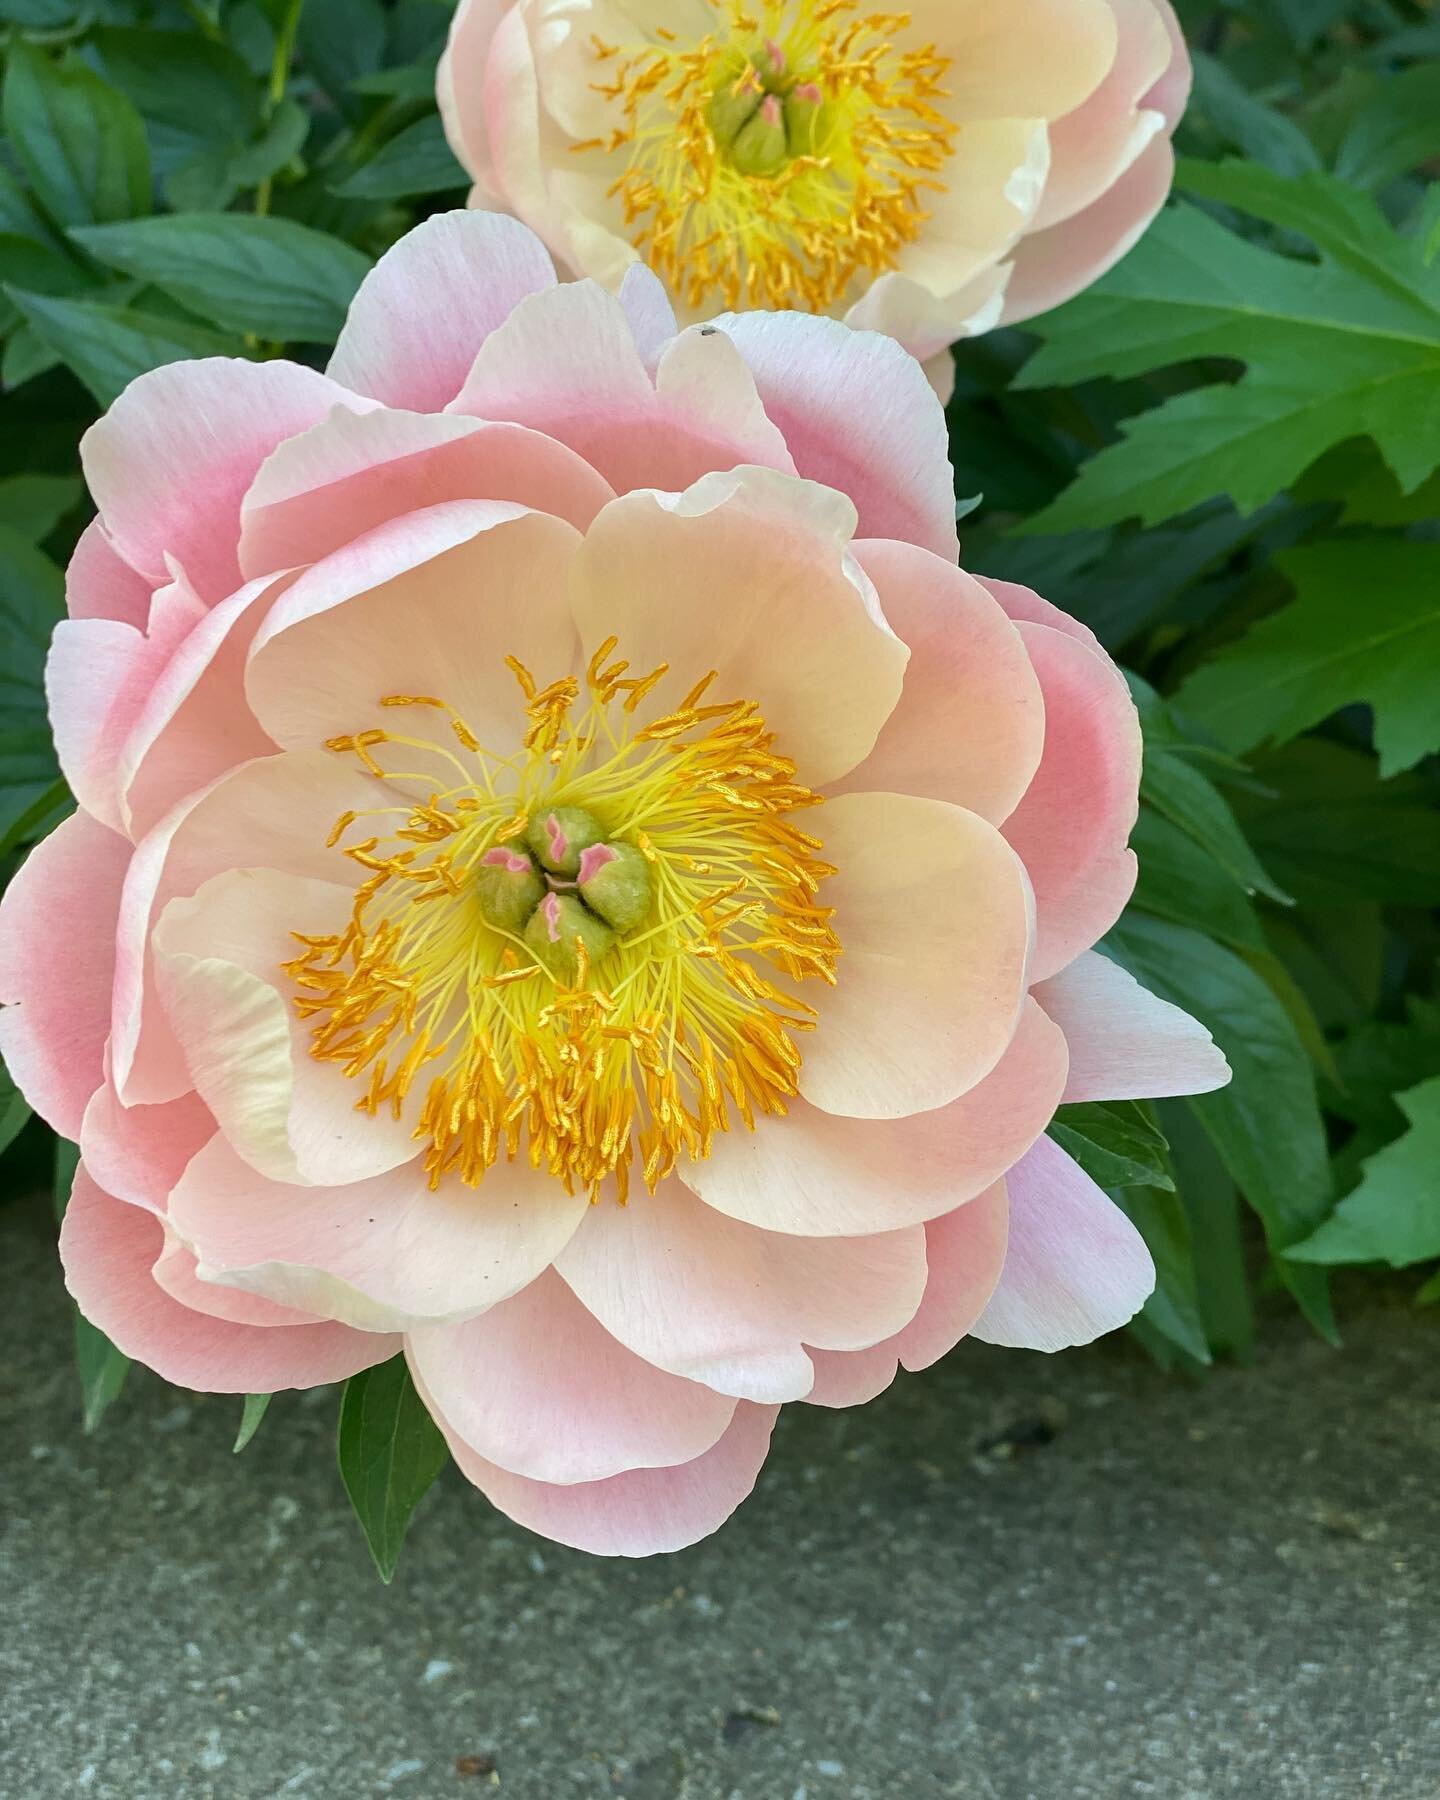 Yeah! The #peonies are here. While they don&rsquo;t need #ants to bloom, the flowers do provide food for ants and in turn the ants eat #pests which attack the blossoms. A nice example of #biologicalmutualism